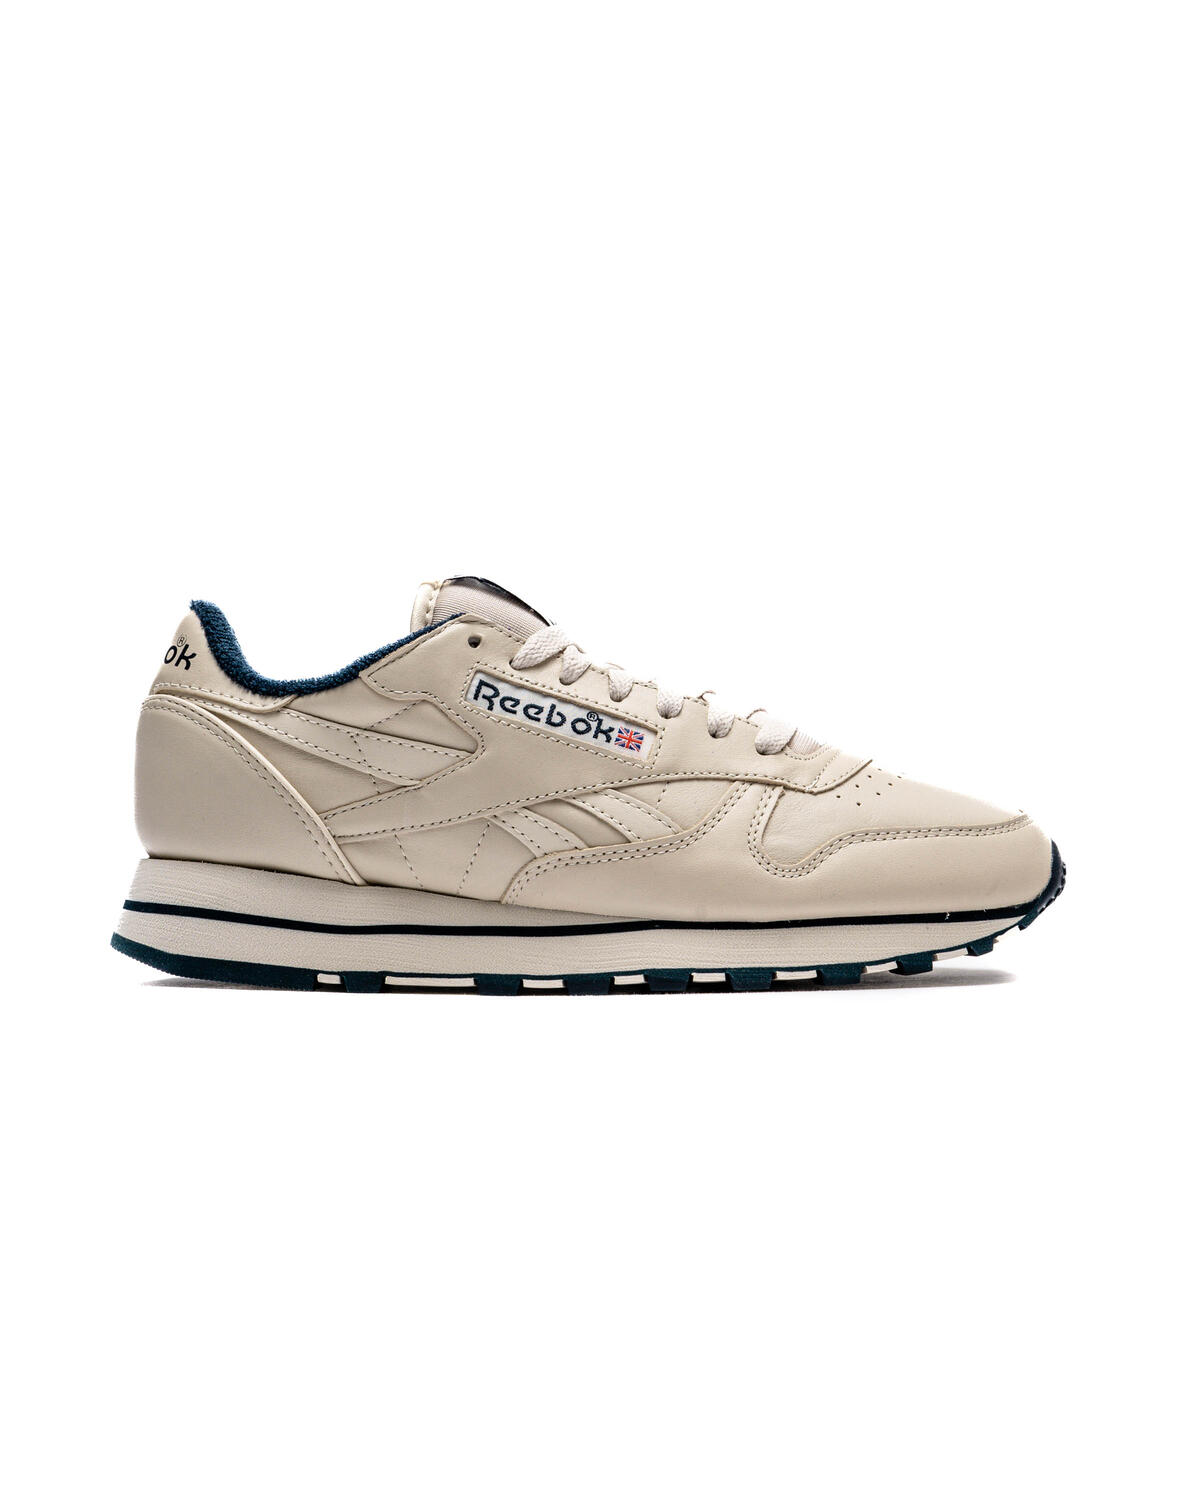 Reebok Classic Leather | Reebok classic, Reebok classic leather, Sneakers  men fashion